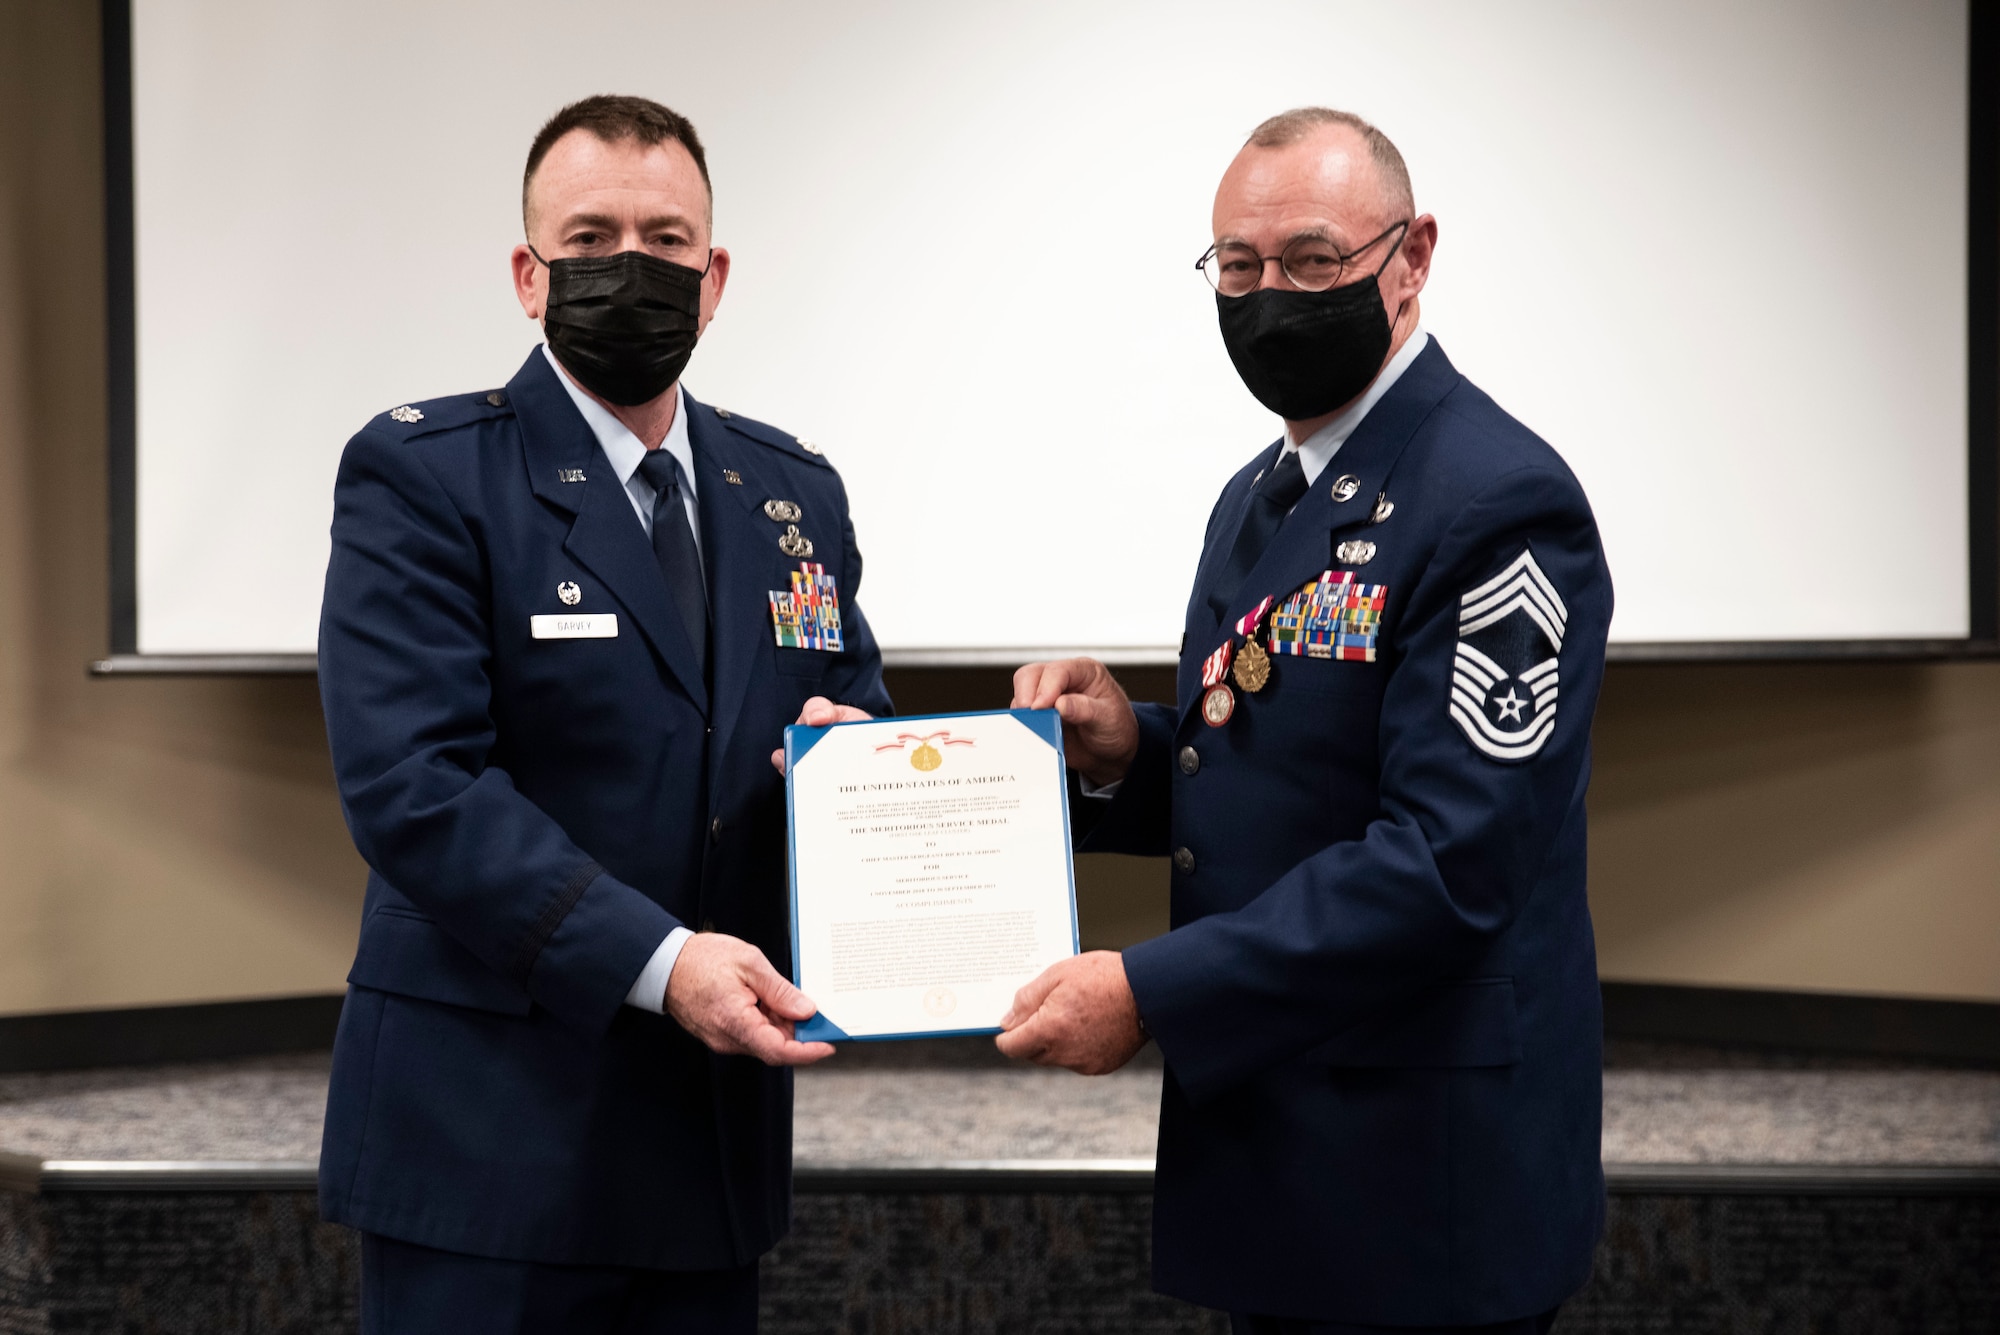 Lt. Col. James T. Garvey presents Chief Master Sgt. Ricky D. Sehorn with the Meritorious Service Medal, first oak leaf cluster, at his retirement ceremony held on September, 11, 2021, at Ebbing Air National Guard Base, AR. Sehorn’s career spanned more than 36 years in the United States armed forces including the Army and Air National Guard.